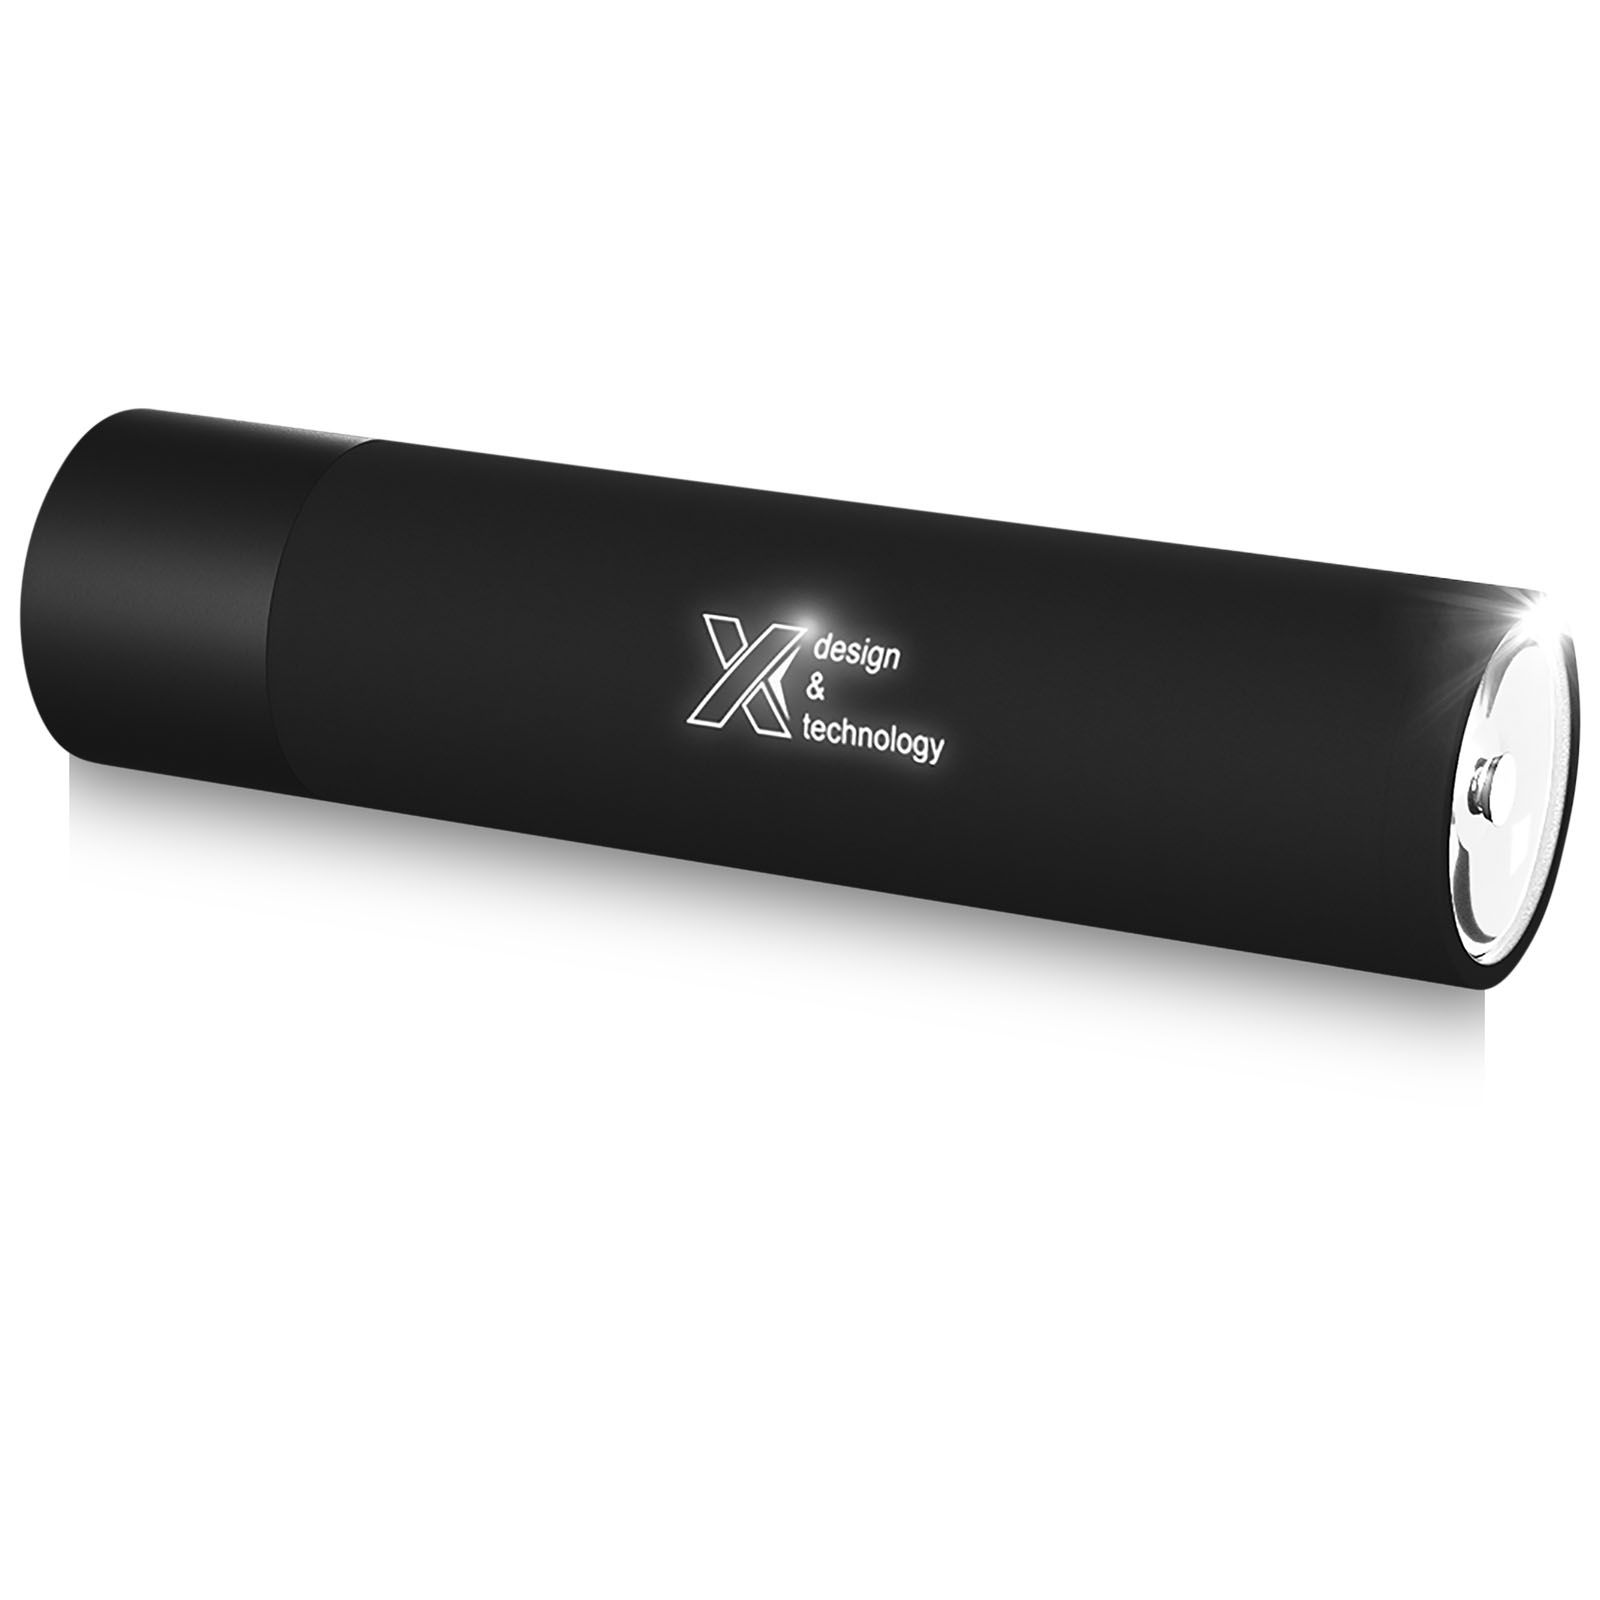 A flashlight with a soft touch and a light-up logo, equipped with a backup charger - Bridge of Allan